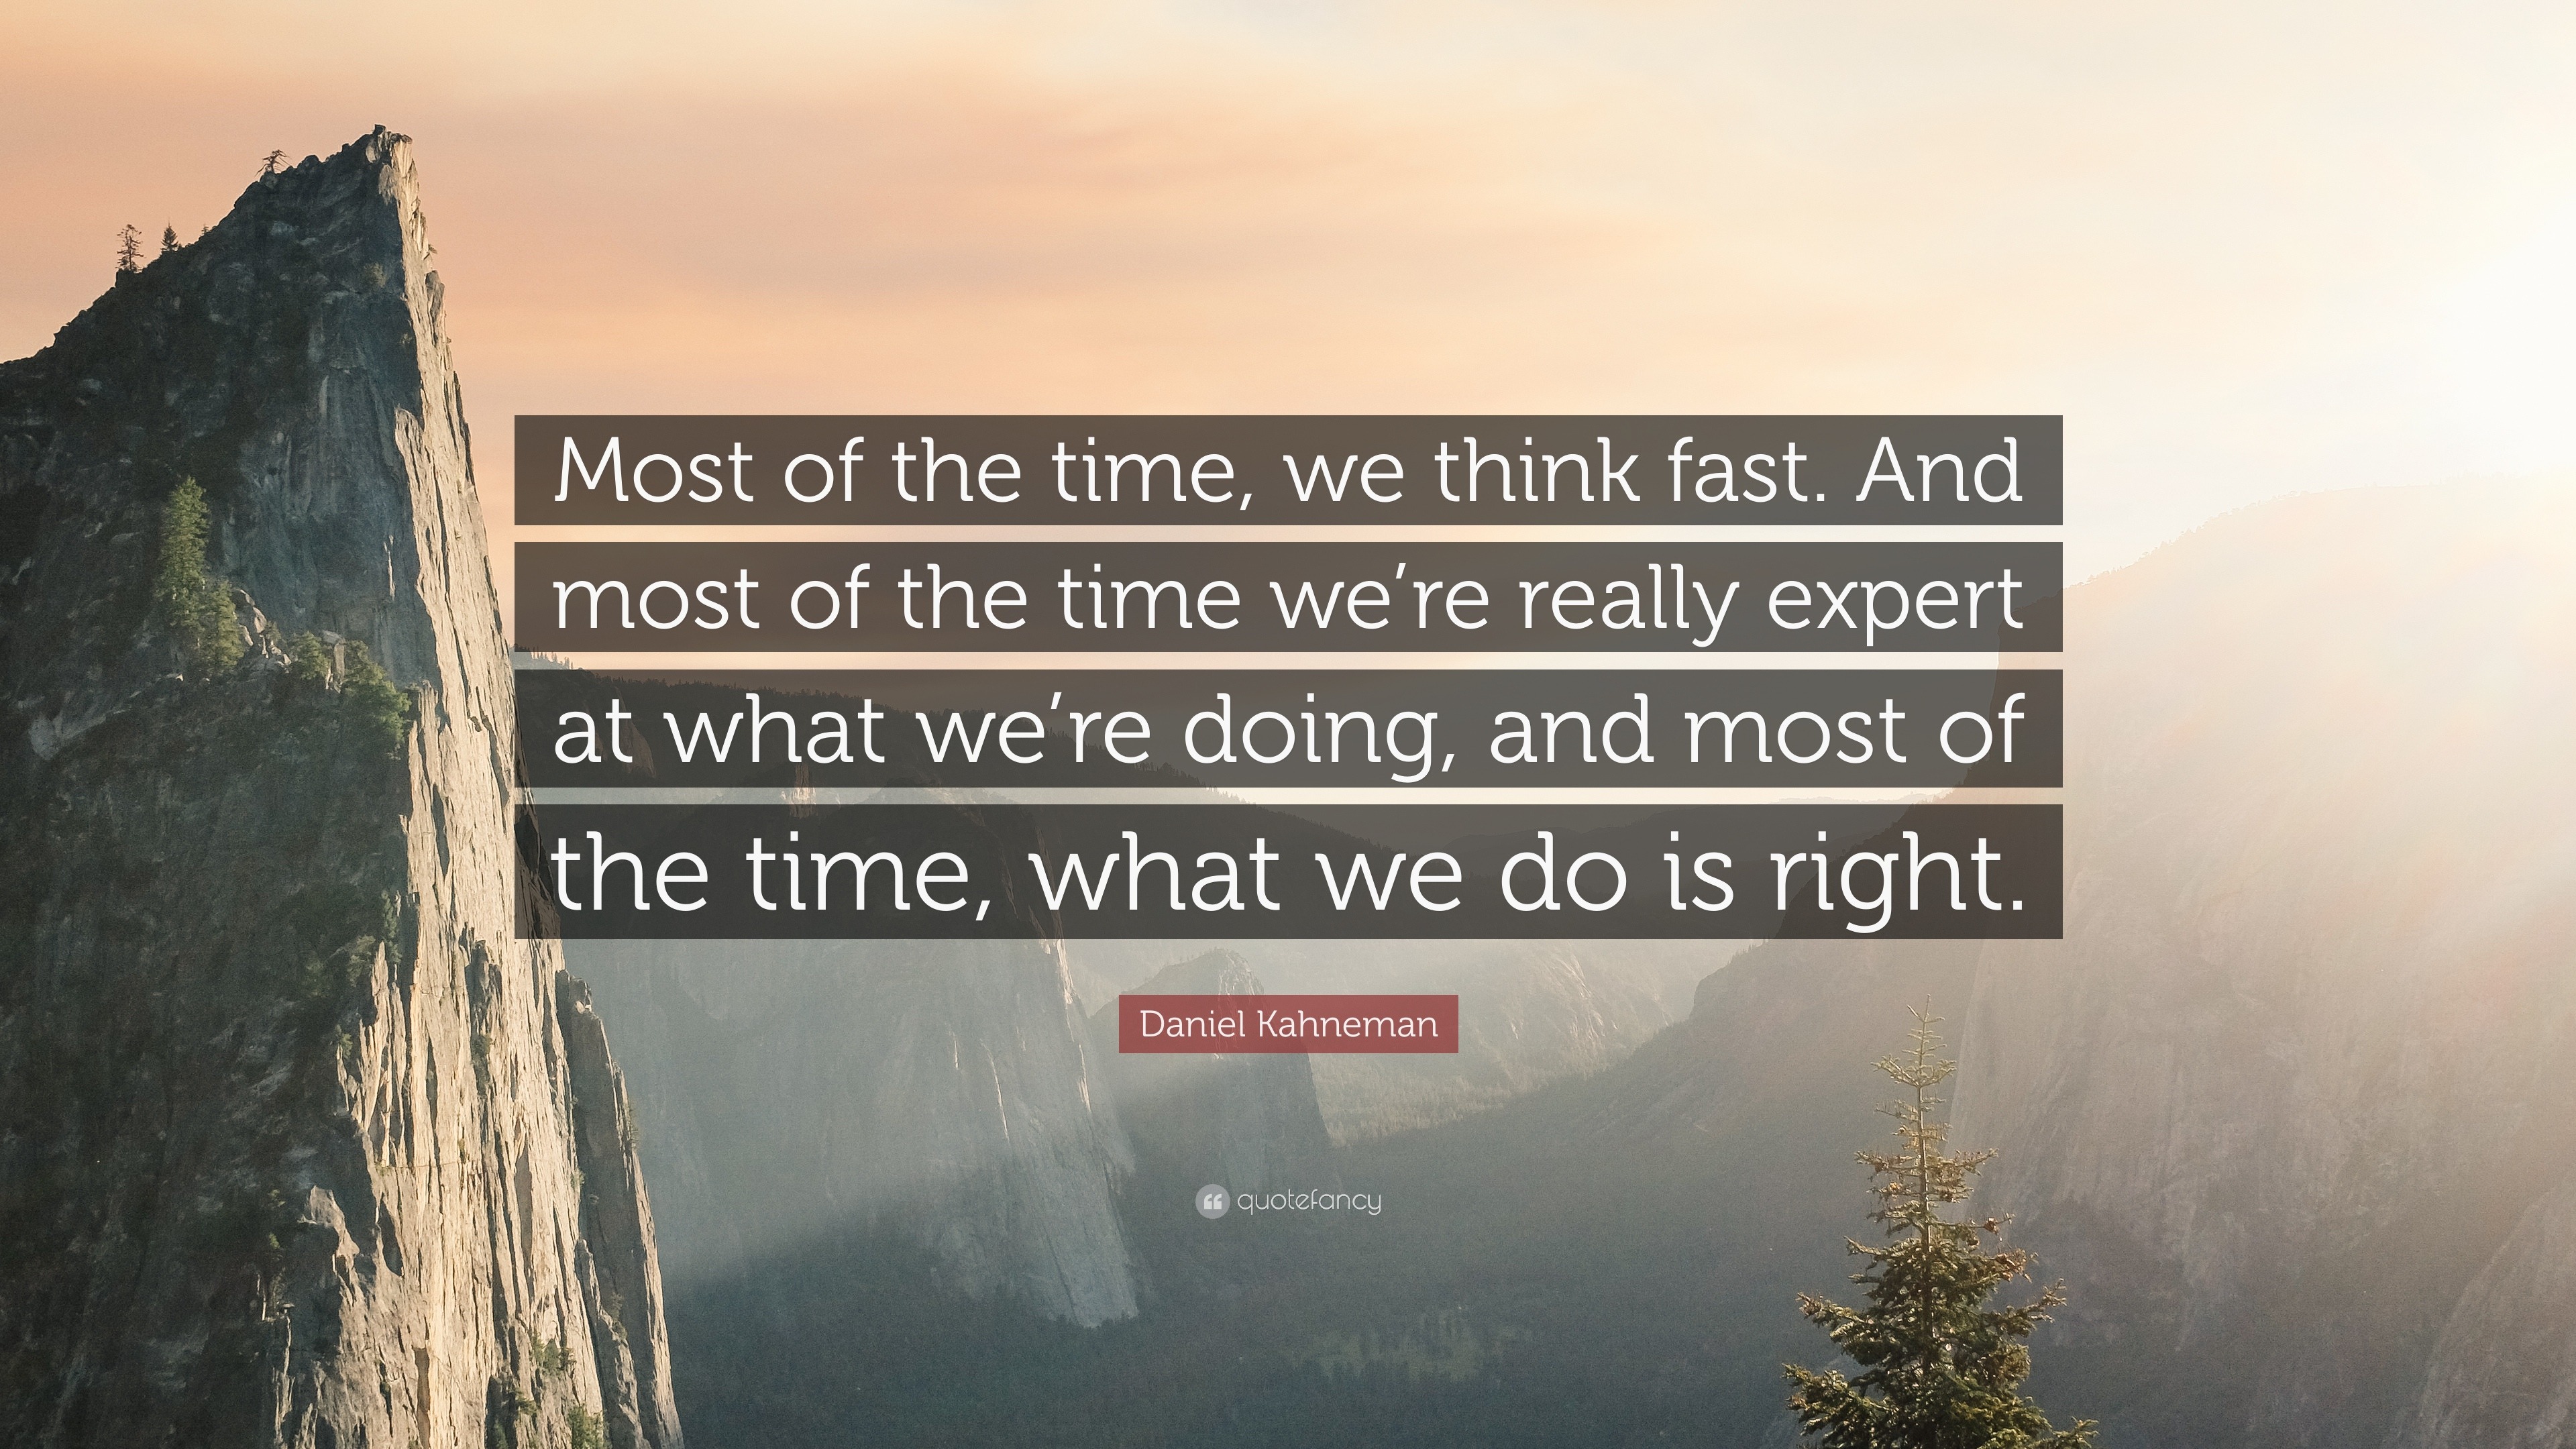 Daniel Kahneman Quote: “Most of the time, we think fast. And most of ...